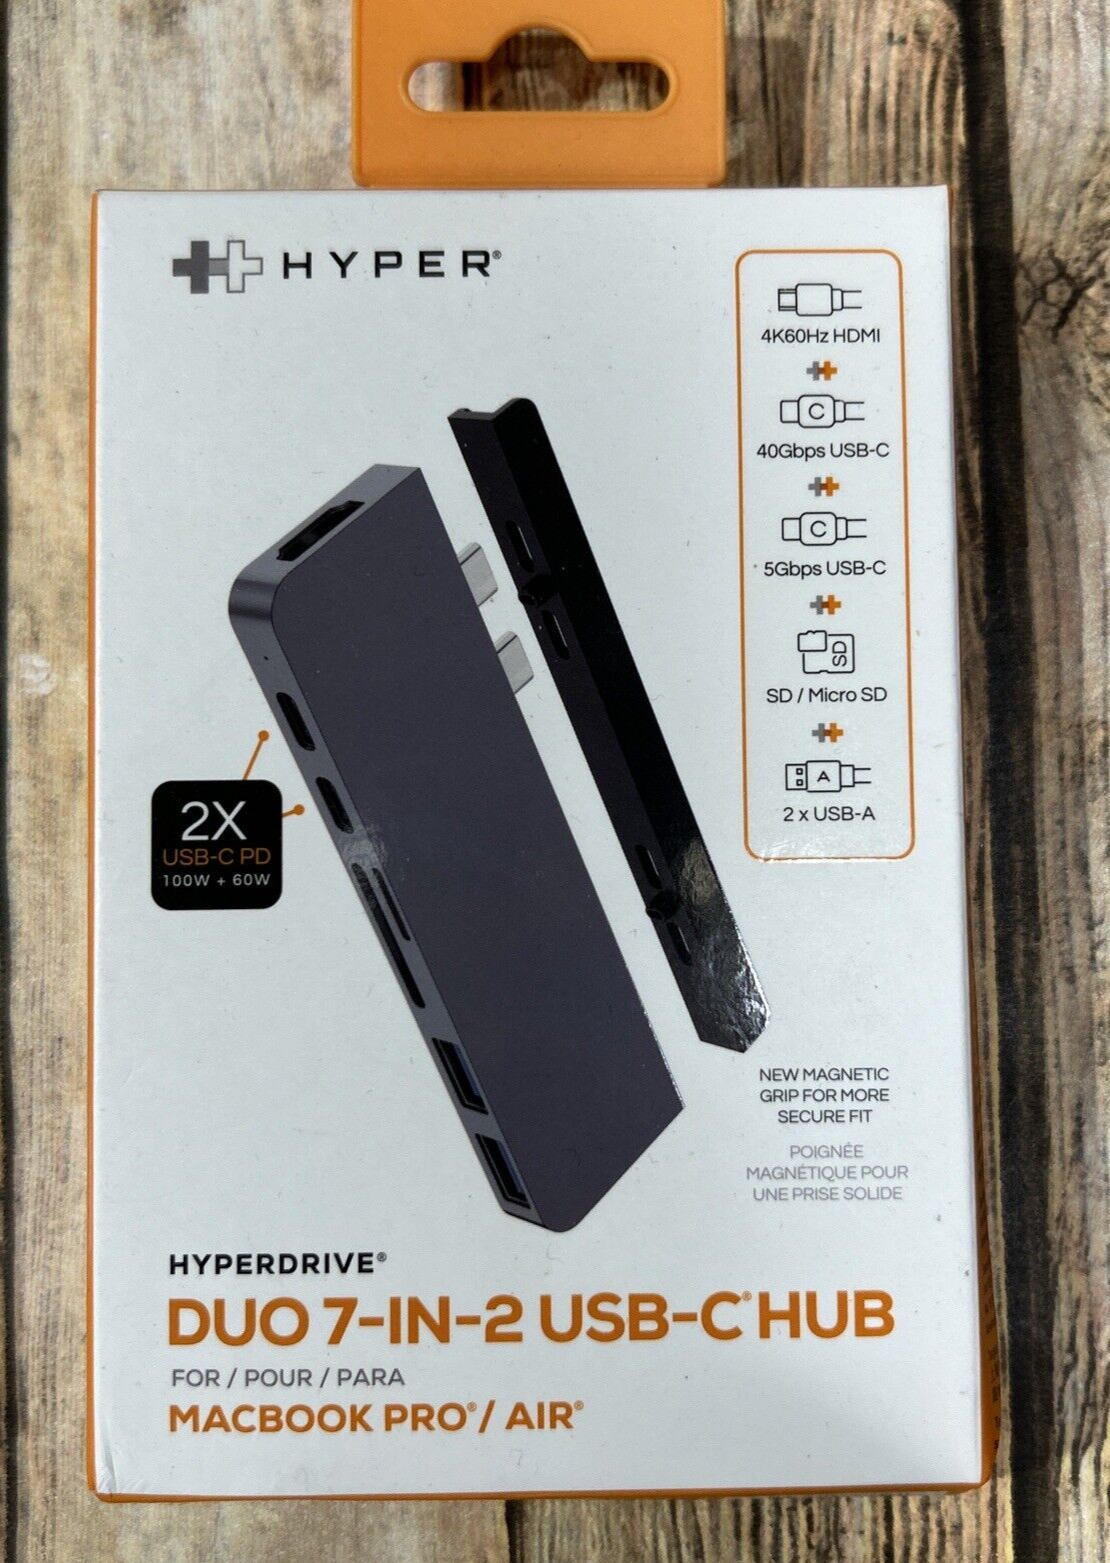 Hyper HyperDrive DUO 7-in-2 USB-C Hub for MacBook Pro/Air HDMI 4K60Hz HDR NEW